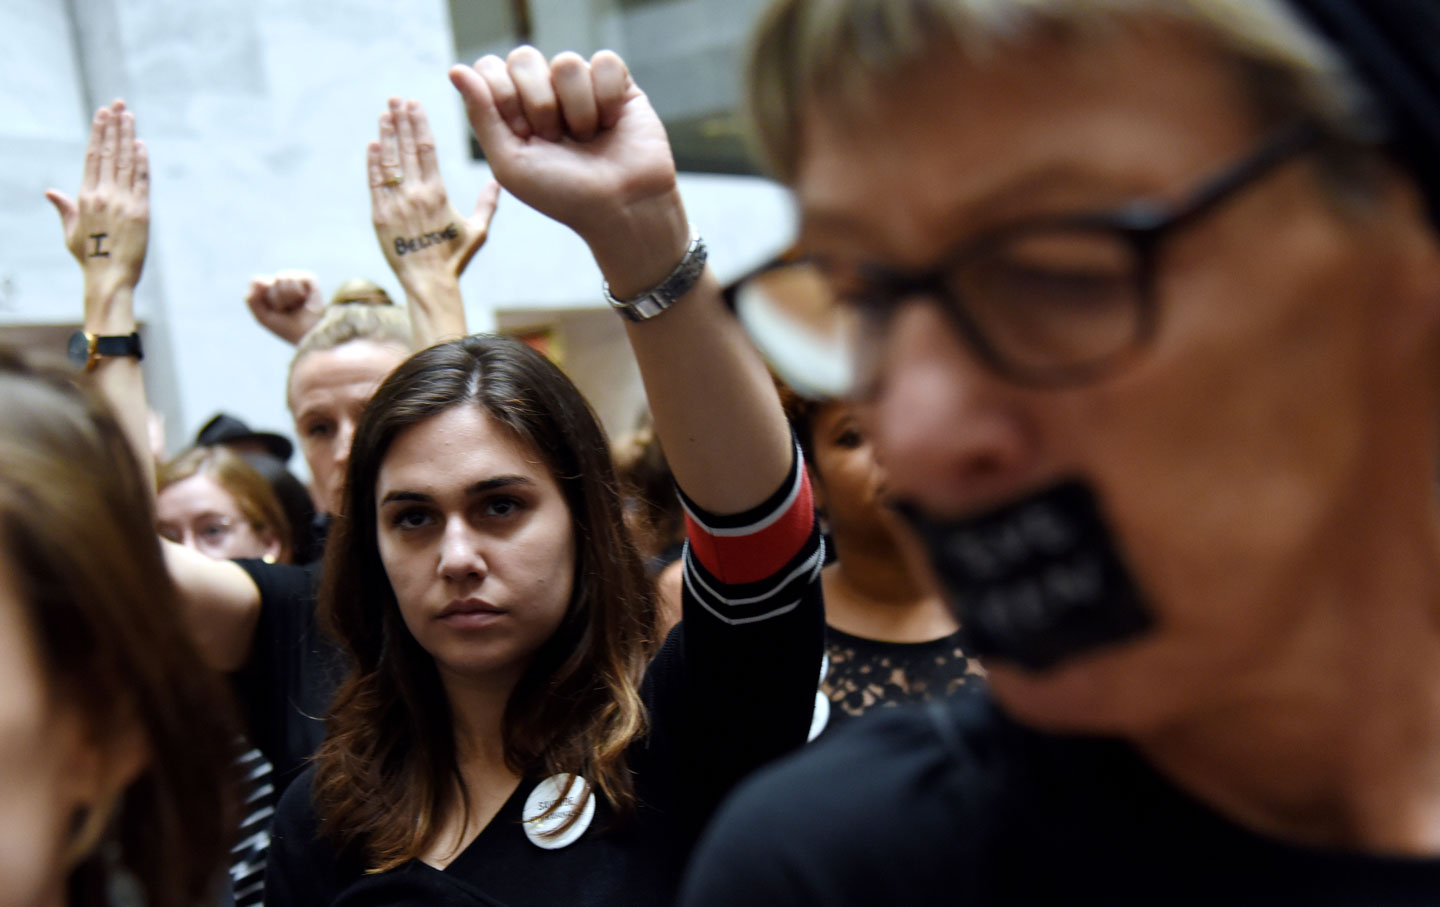 Demonstrators opposed to the Supreme Court nominee Brett Kavanaugh protest inside the Hart building on Capitol Hill.